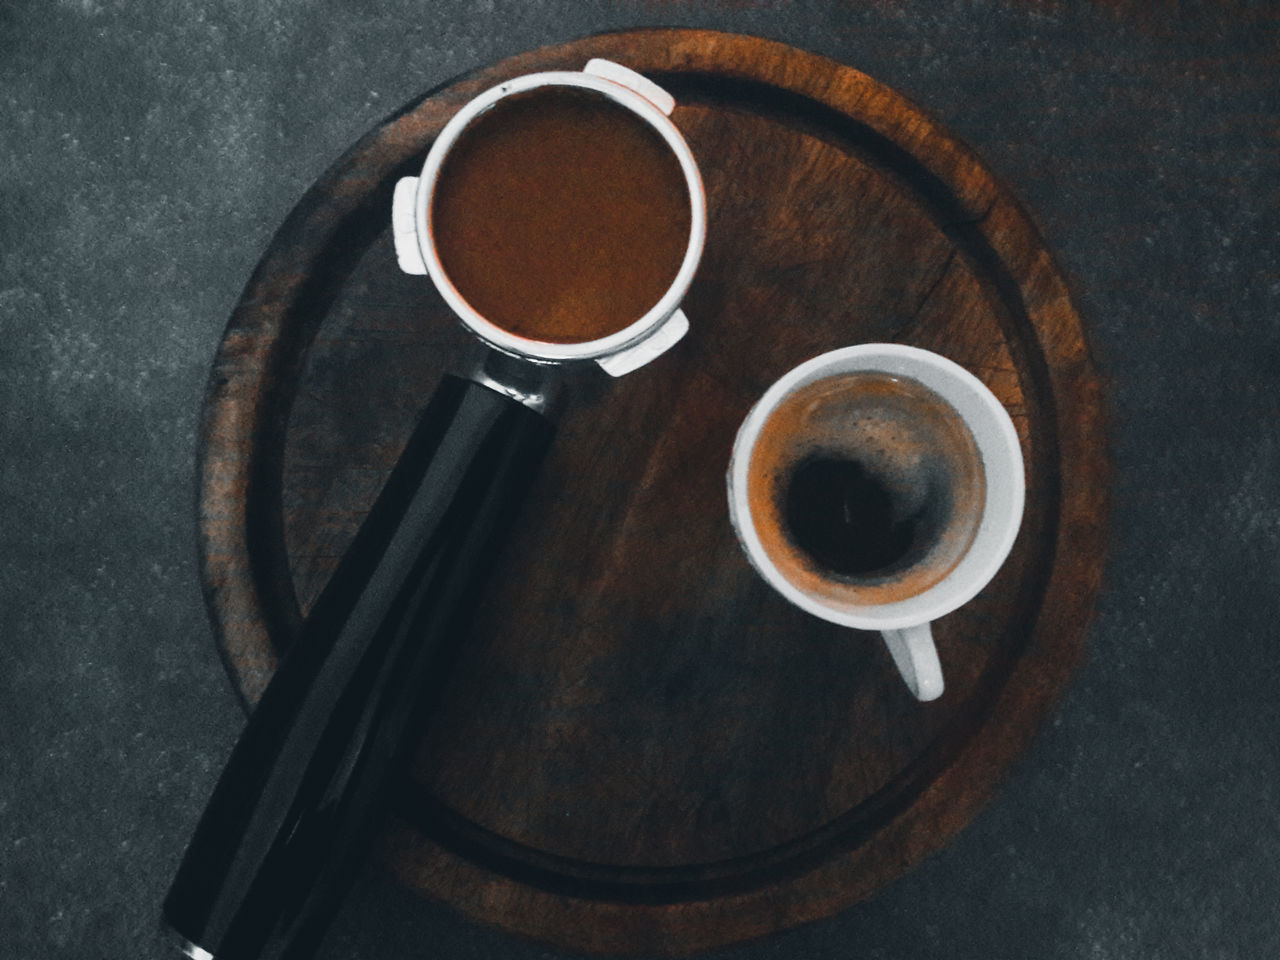 coffee, drink, food and drink, cup, mug, coffee cup, refreshment, directly above, table, high angle view, hot drink, indoors, still life, wood, no people, food, freshness, crockery, kitchen utensil, saucer, tea, spoon, black coffee, close-up